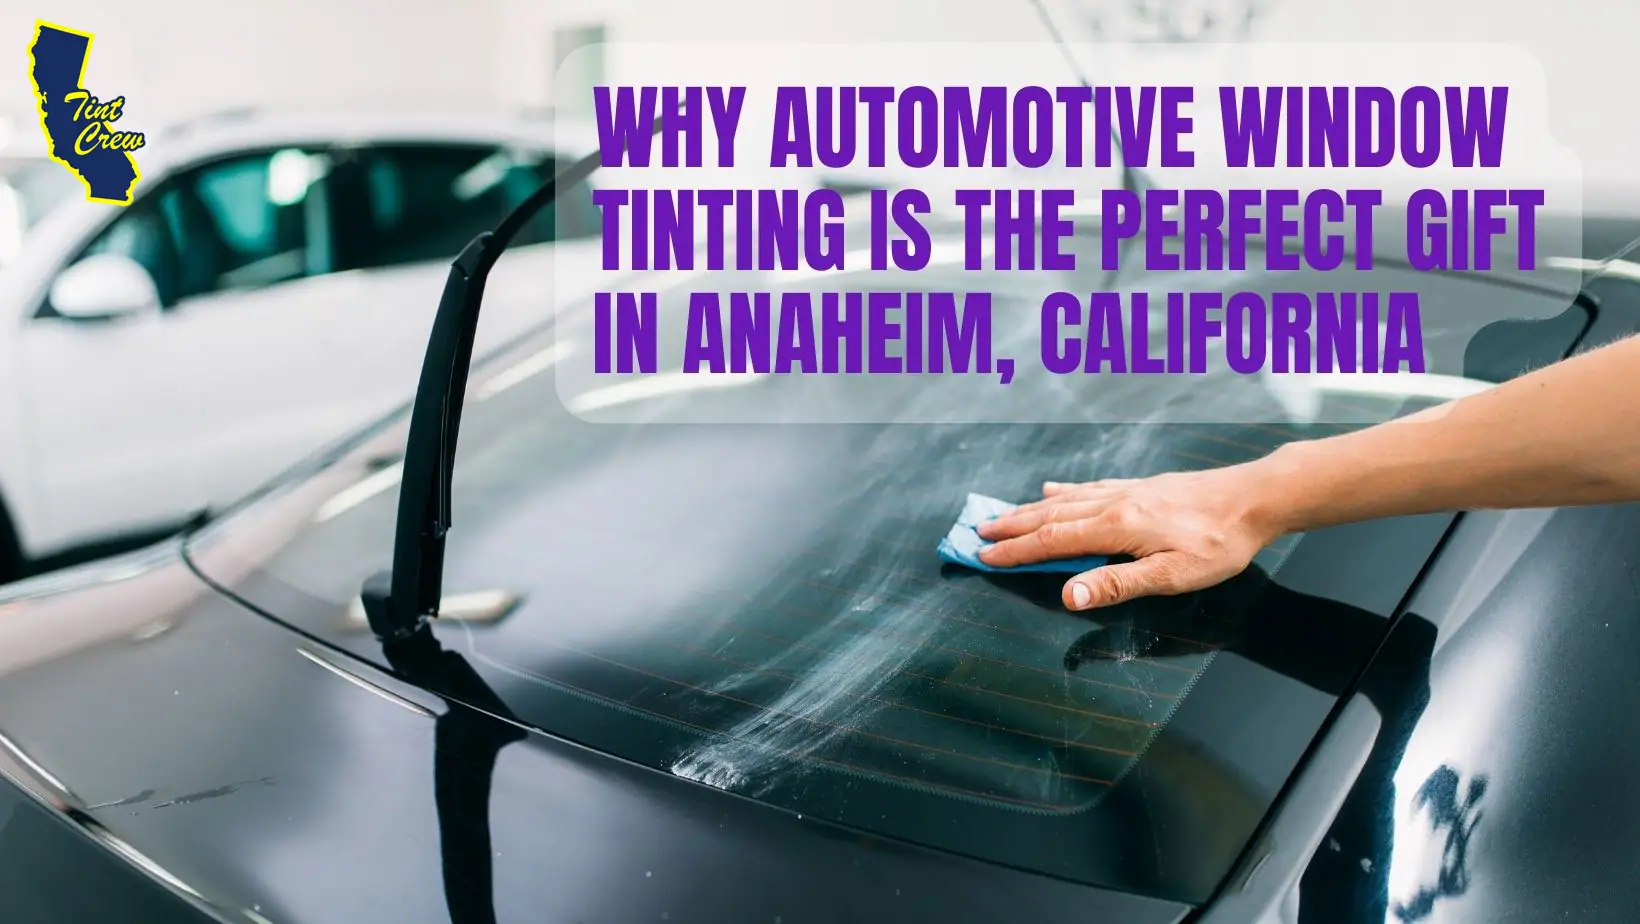 Why Automotive Window Tinting is the Perfect Gift in Anaheim, California